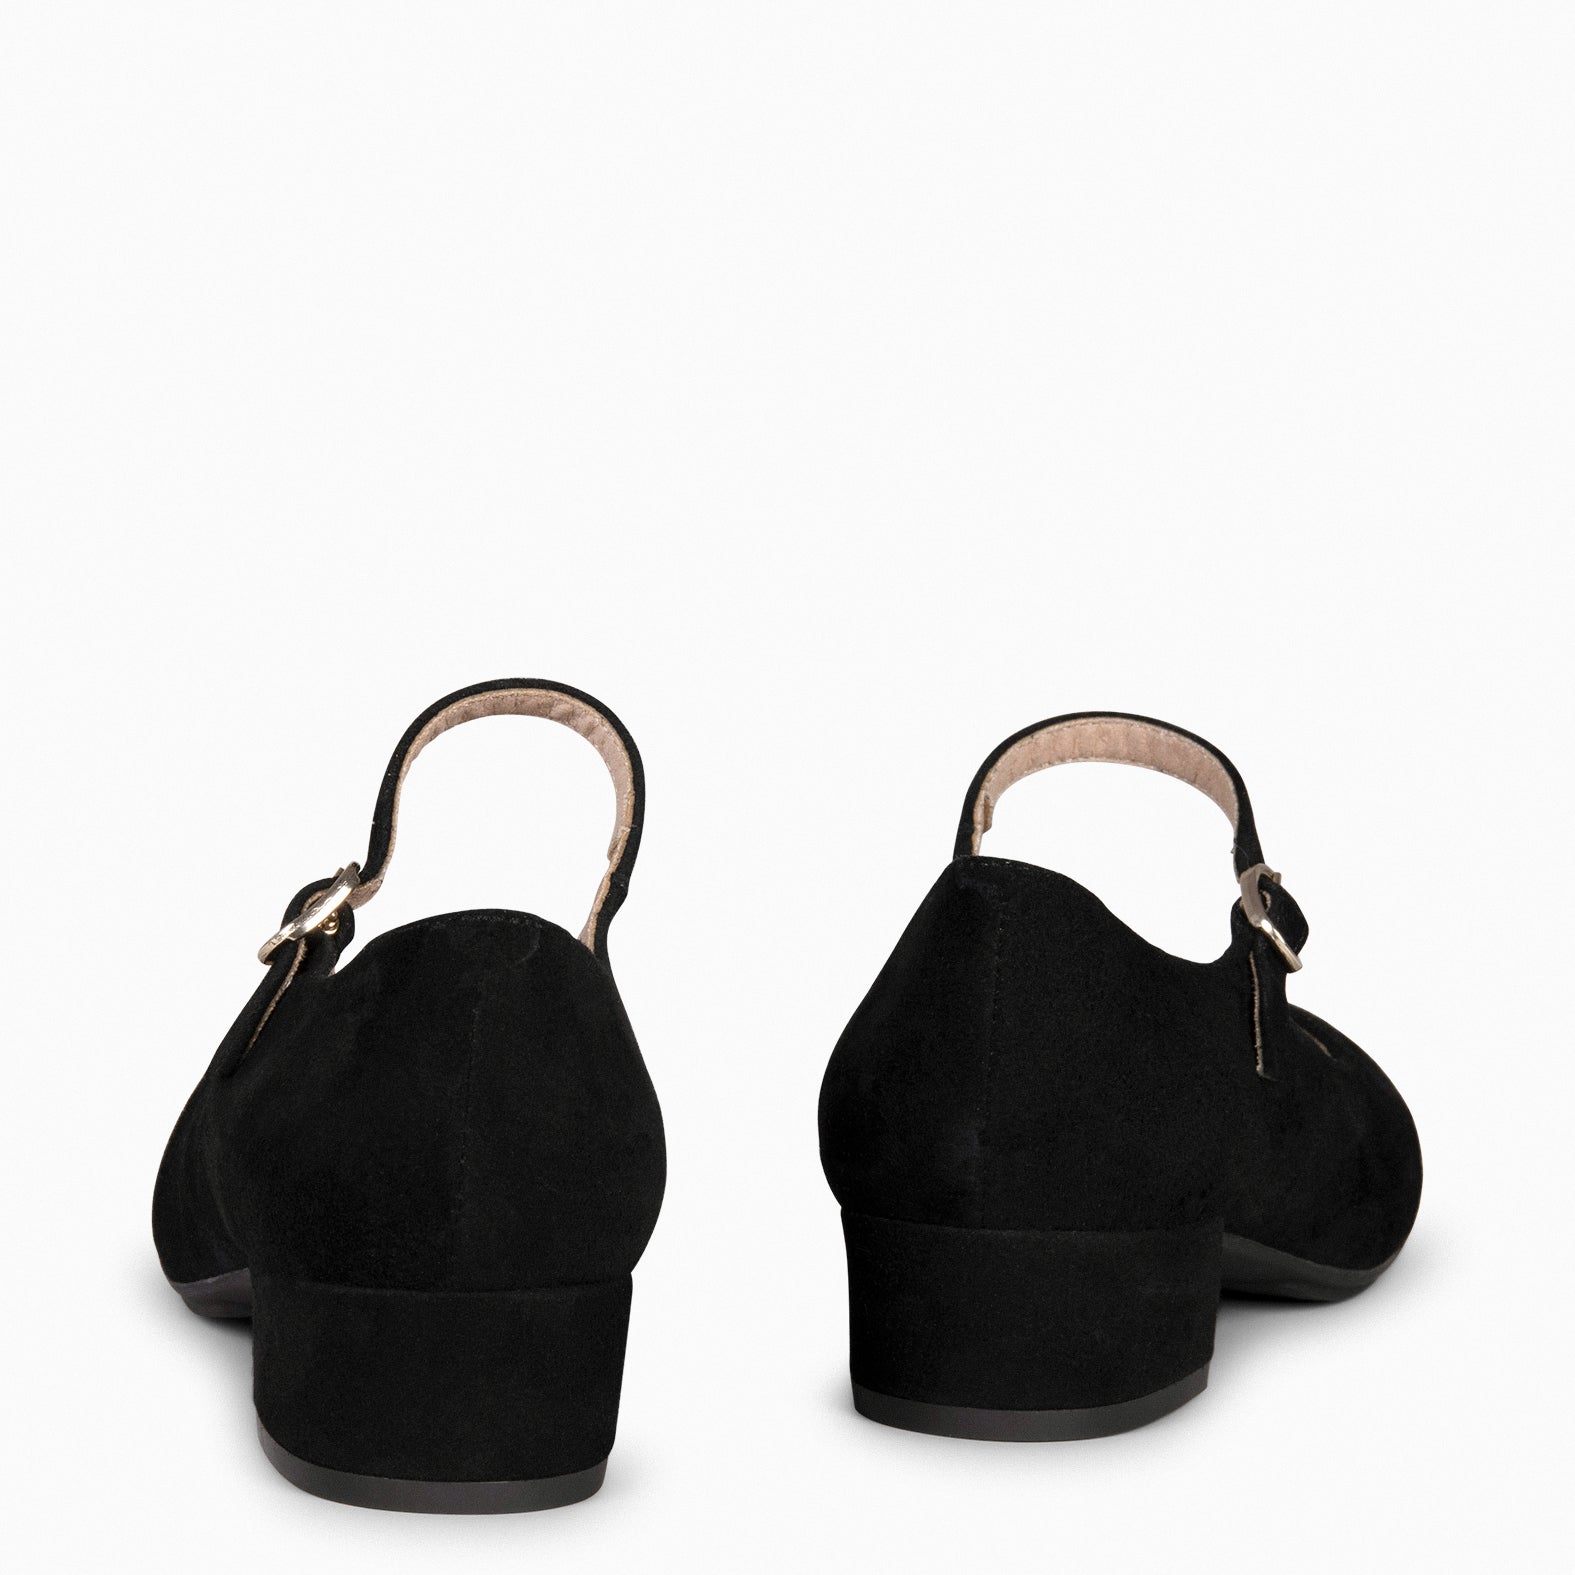 NORA – BLACK Mary-Janes with low heel 